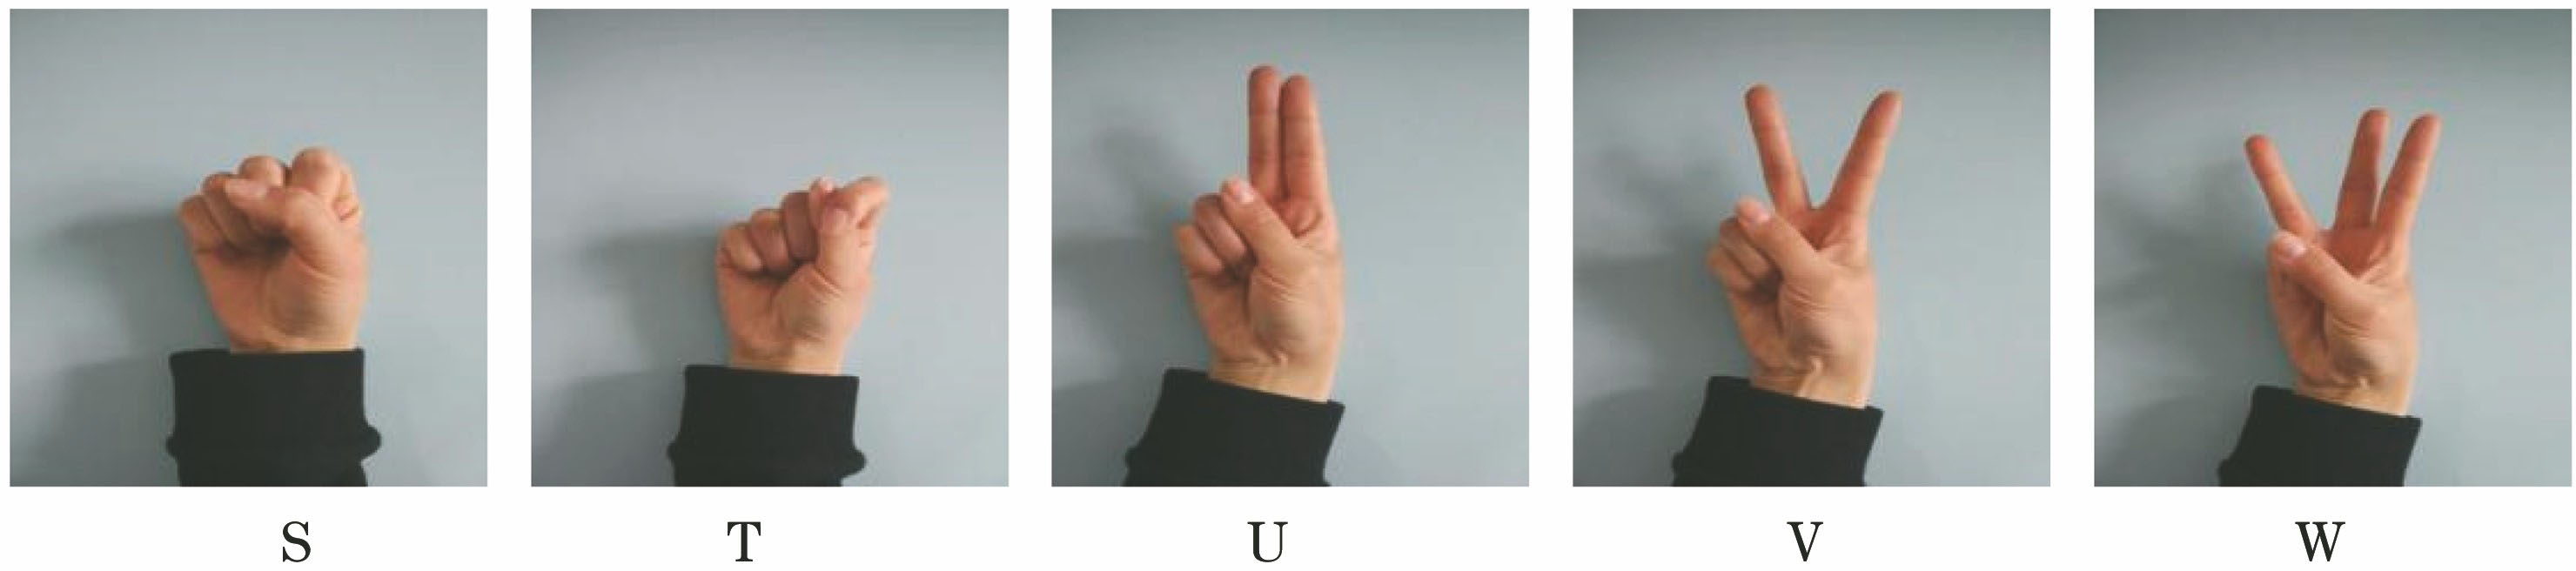 Self-acquired gesture images